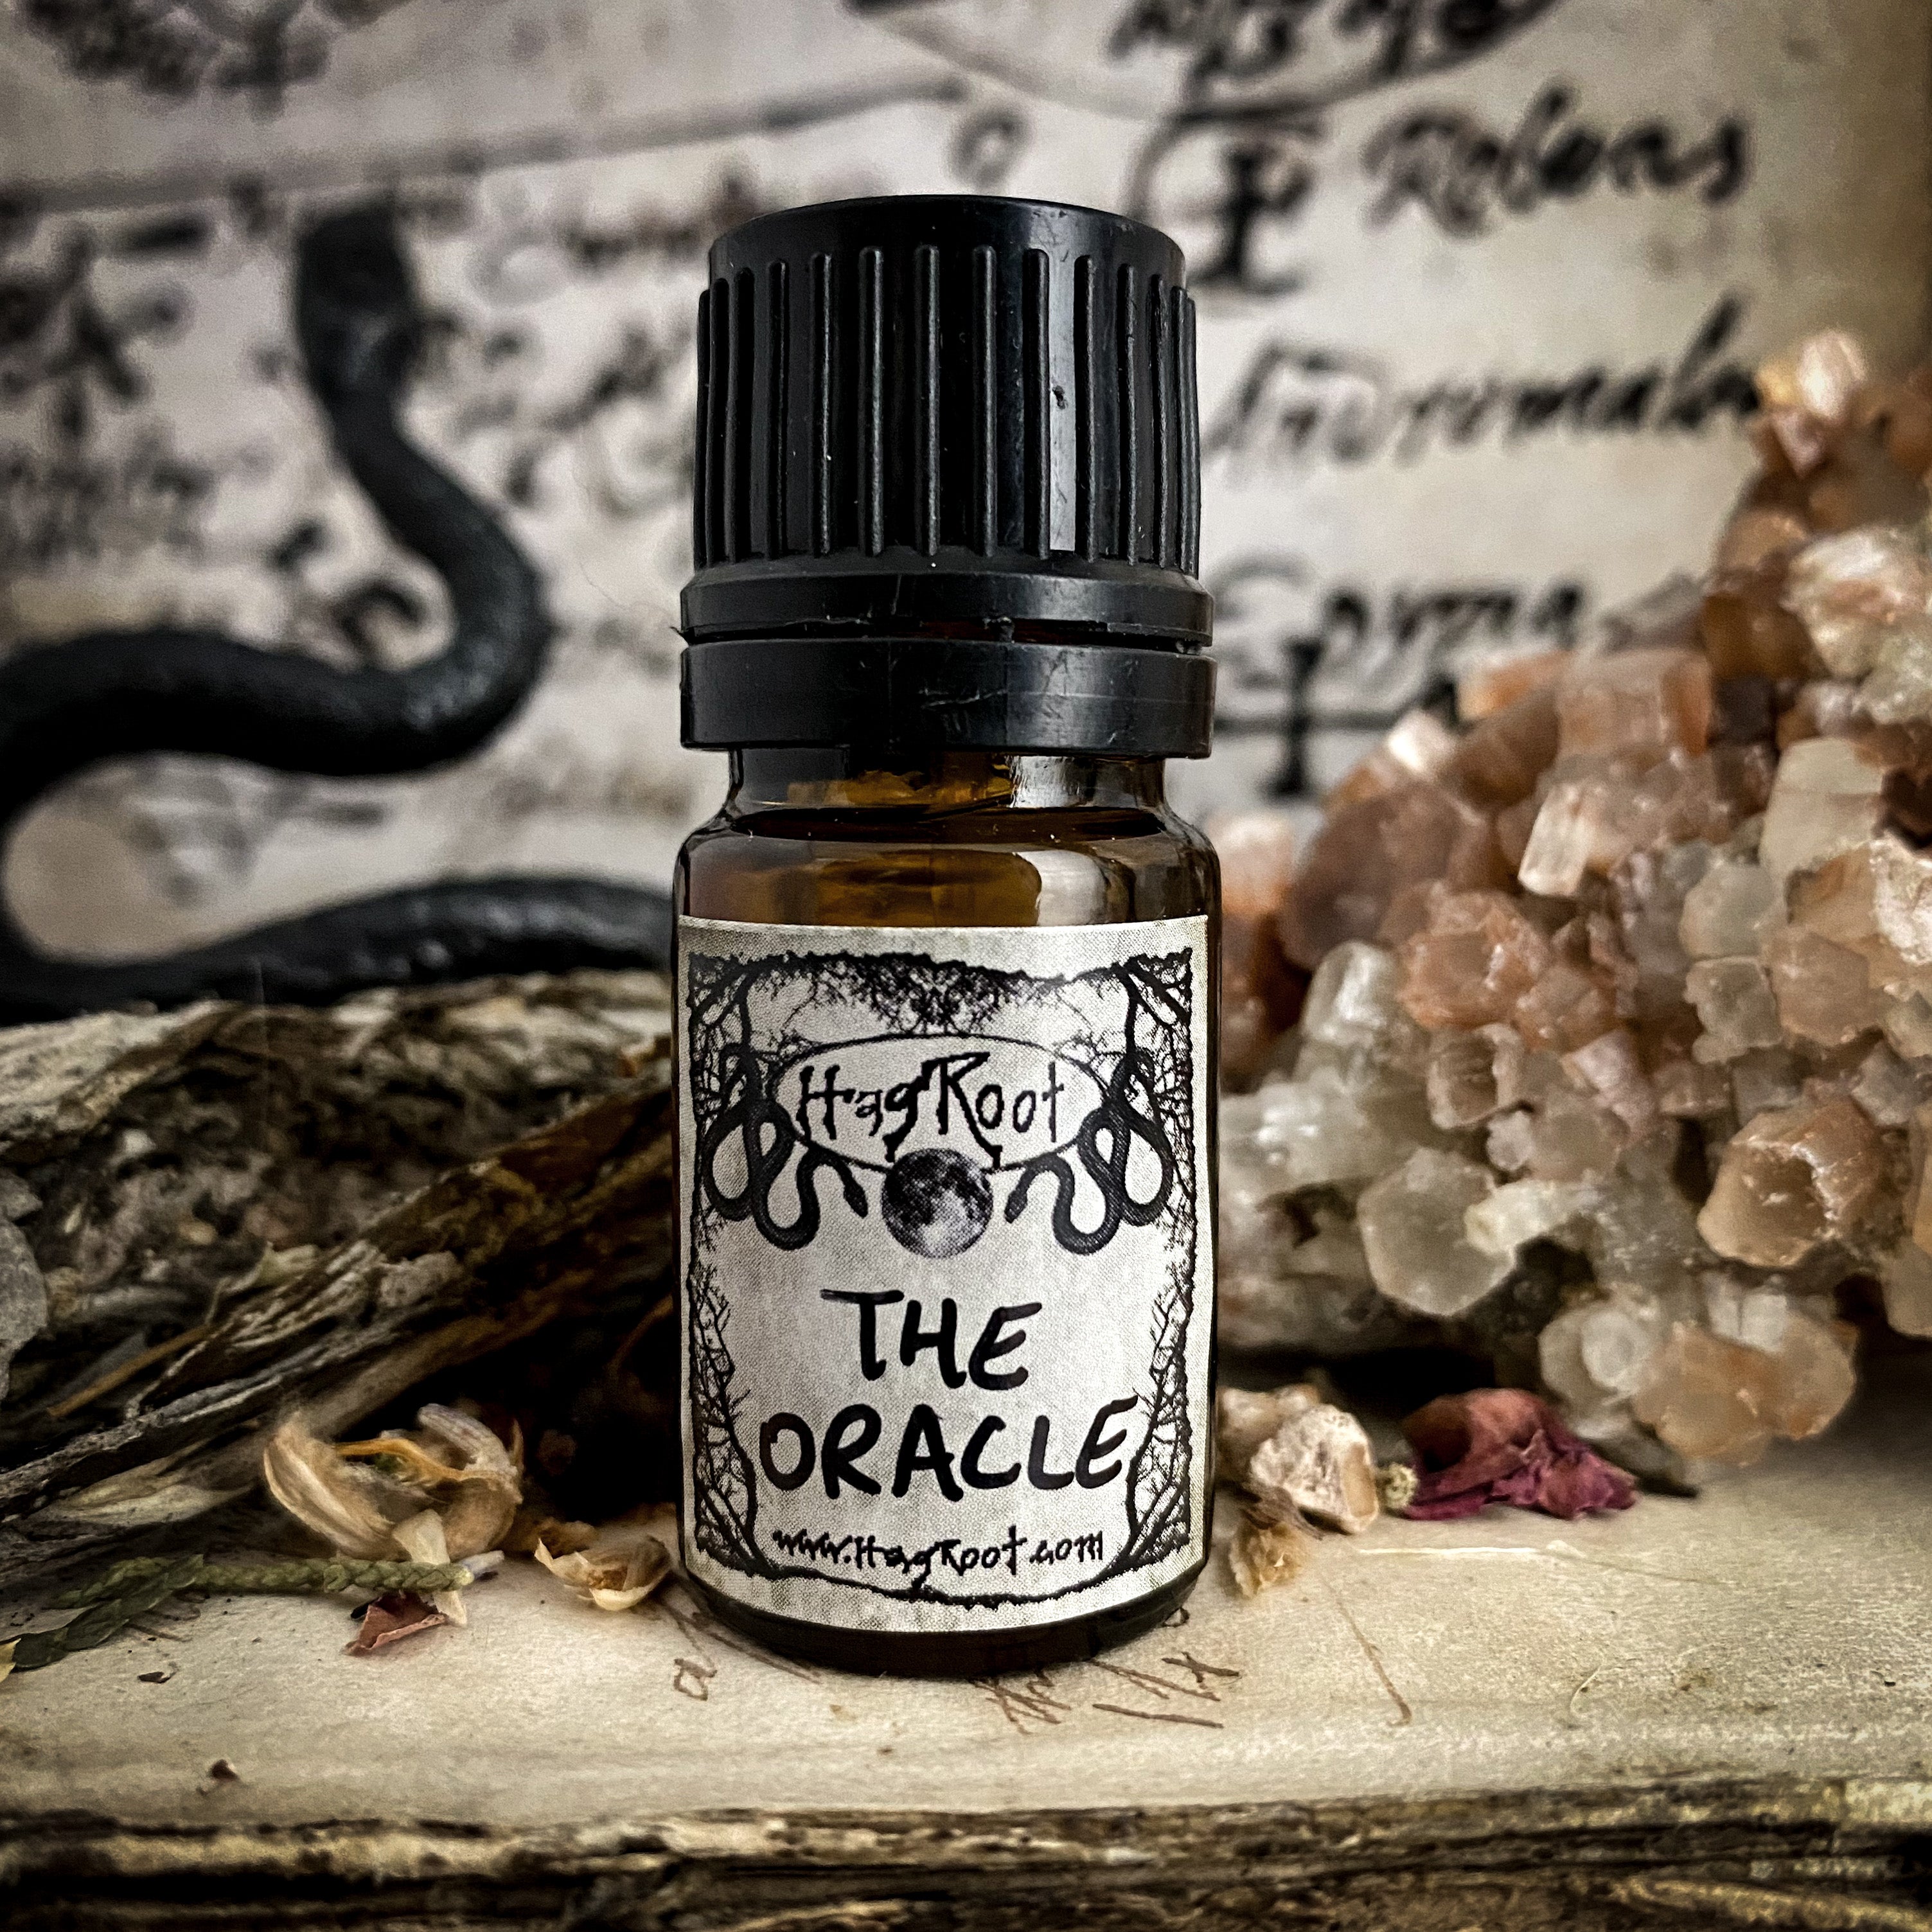 THE ORACLE-(Tea Leaves, Mystical Spices and Resins)-Perfume, Cologne, Anointing, Ritual Oil